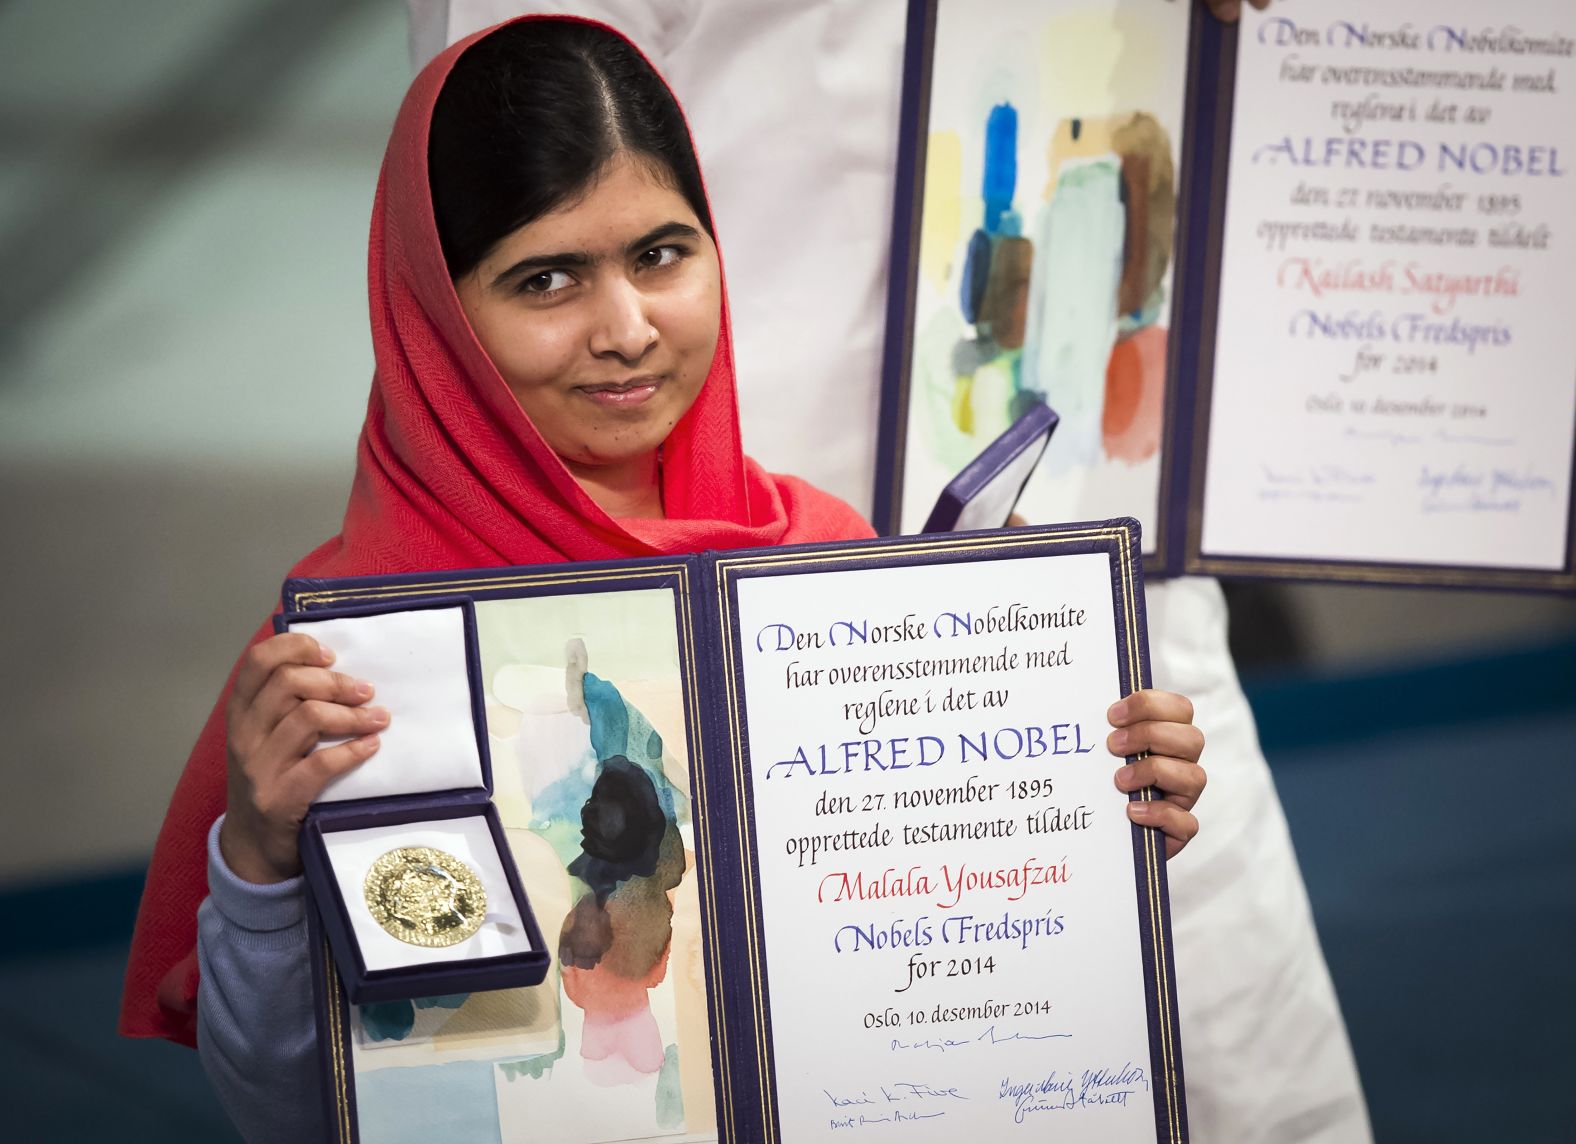 Nobel Peace Prize laureate Malala Yousafzai during the awards ceremony at the City Hall in Oslo, Norway, on December 10, 2014. Two years earlier, she was shot in the head by the Pakistani Taliban for her efforts to promote girls' education in the country. 